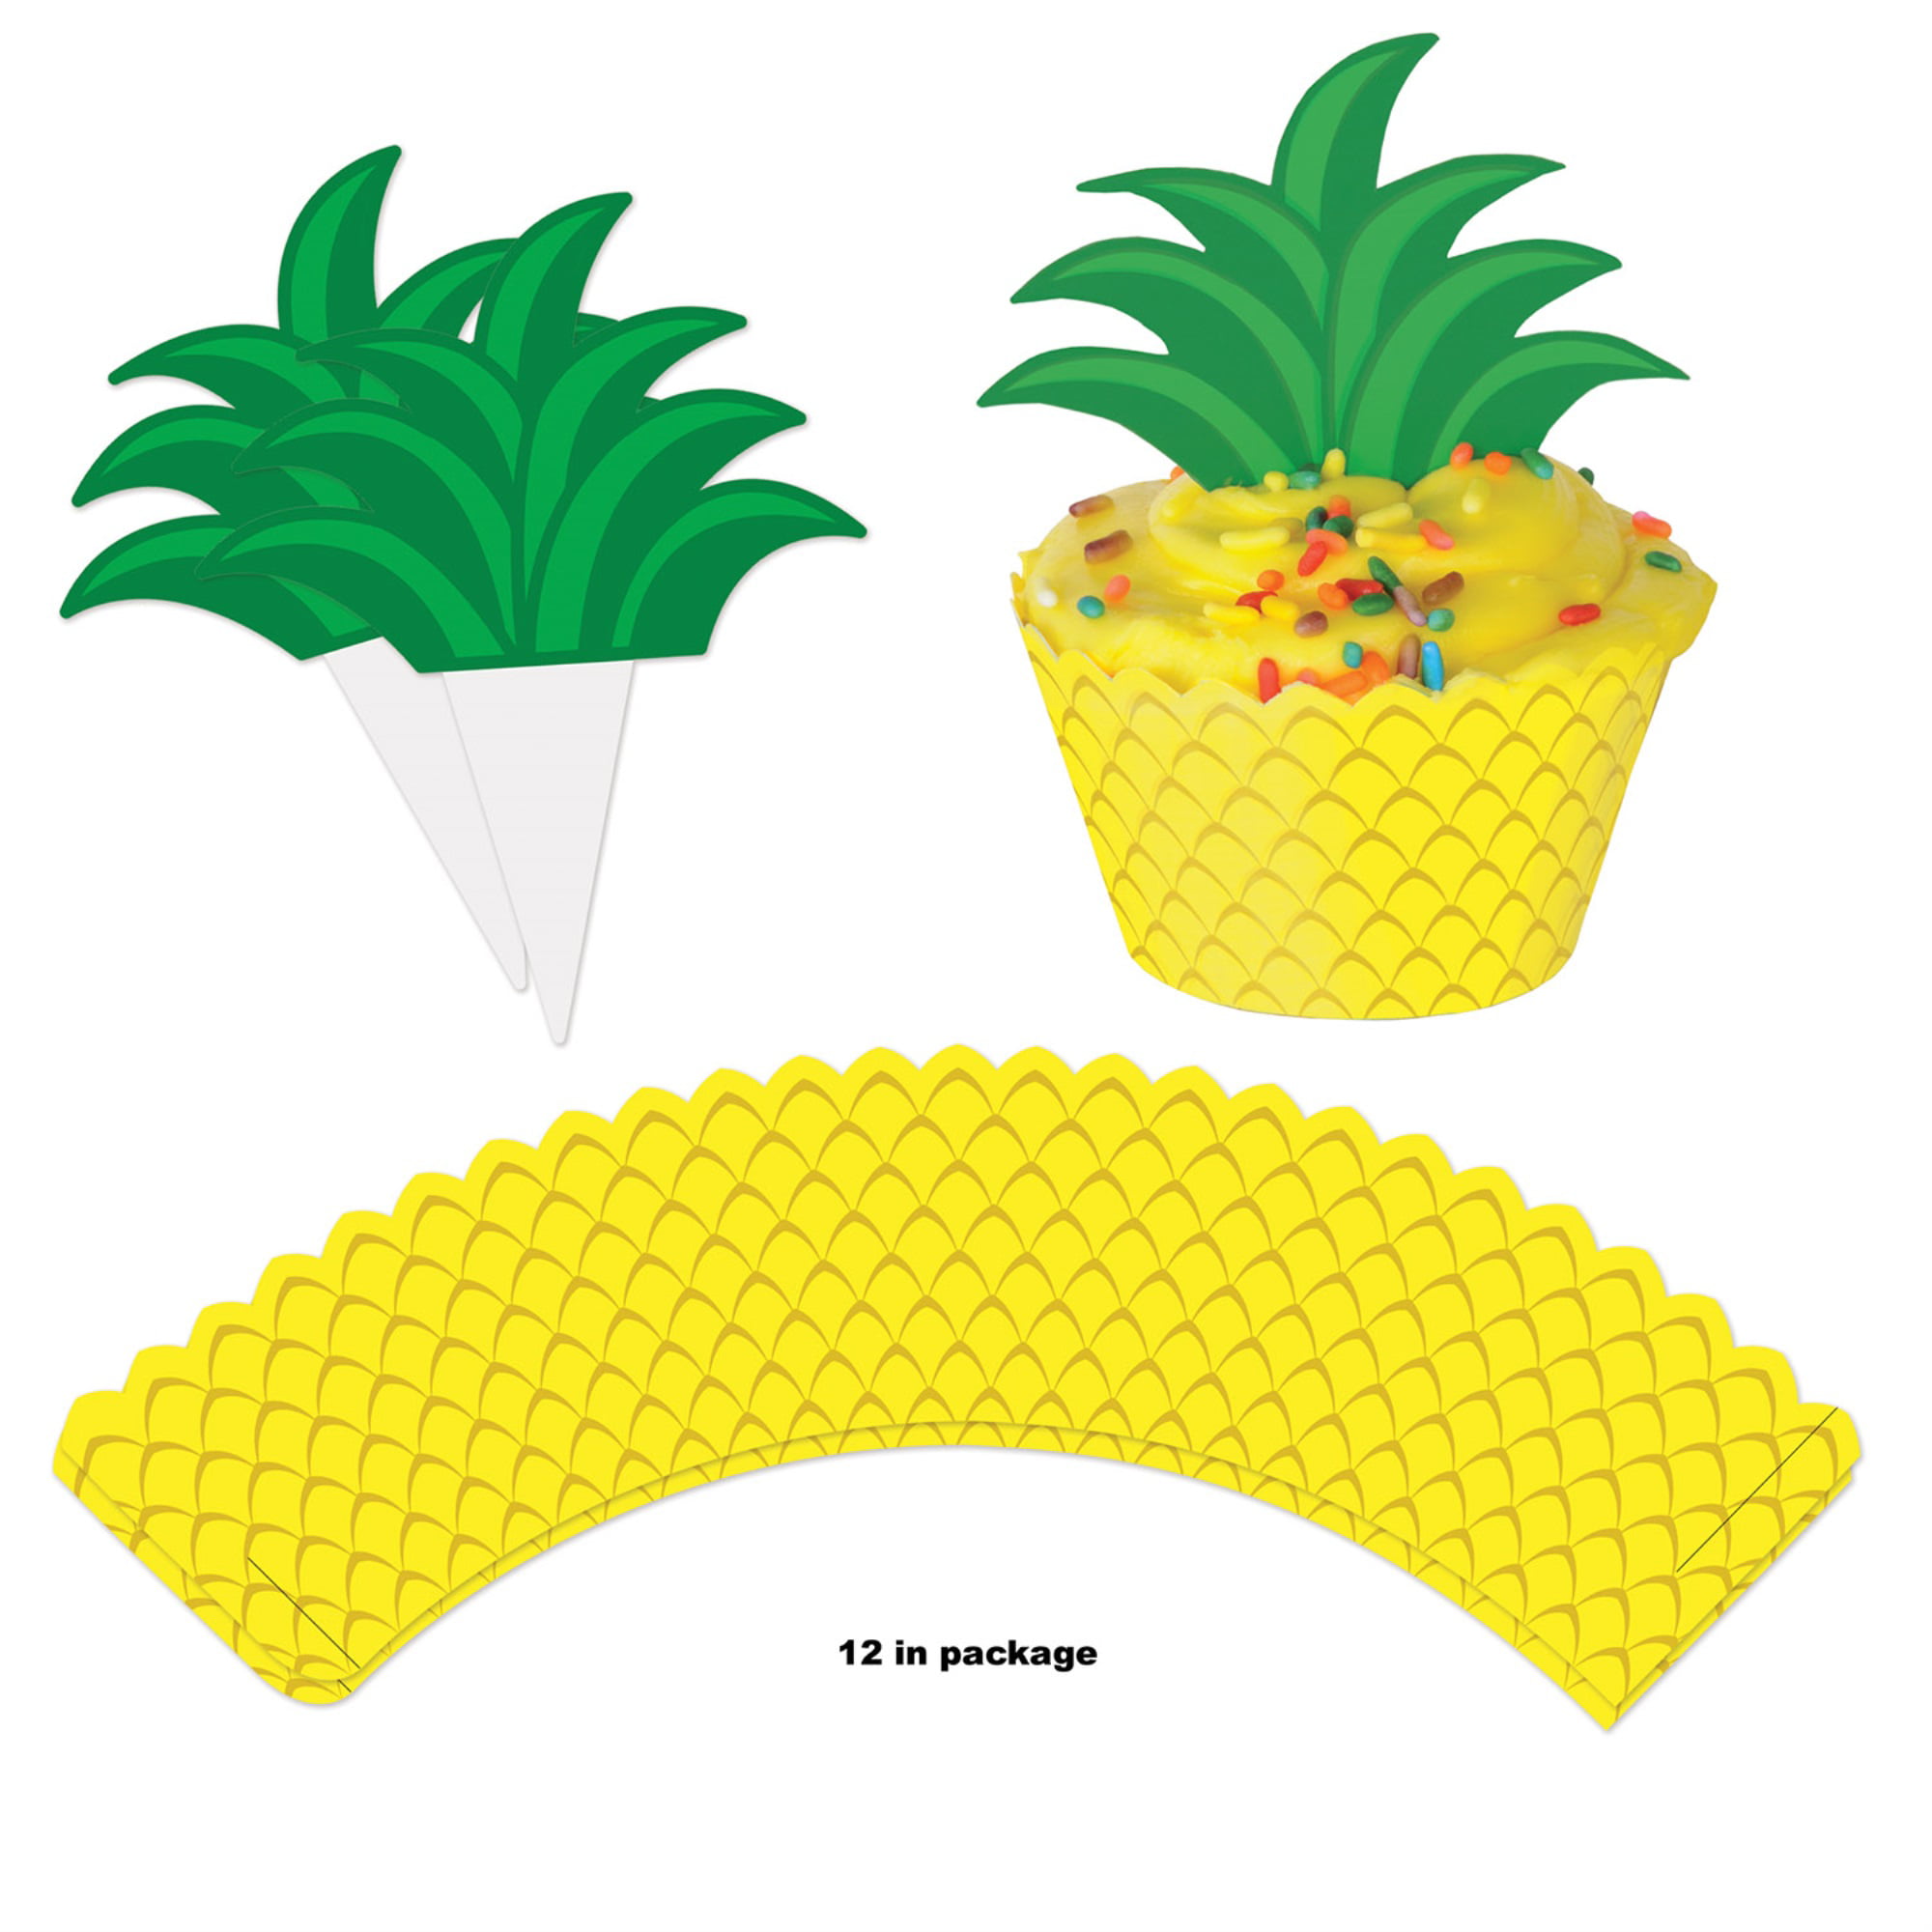 Picture of Beistle 52326 8 in. Pineapple Cupcake Wrappers - Pack of 12